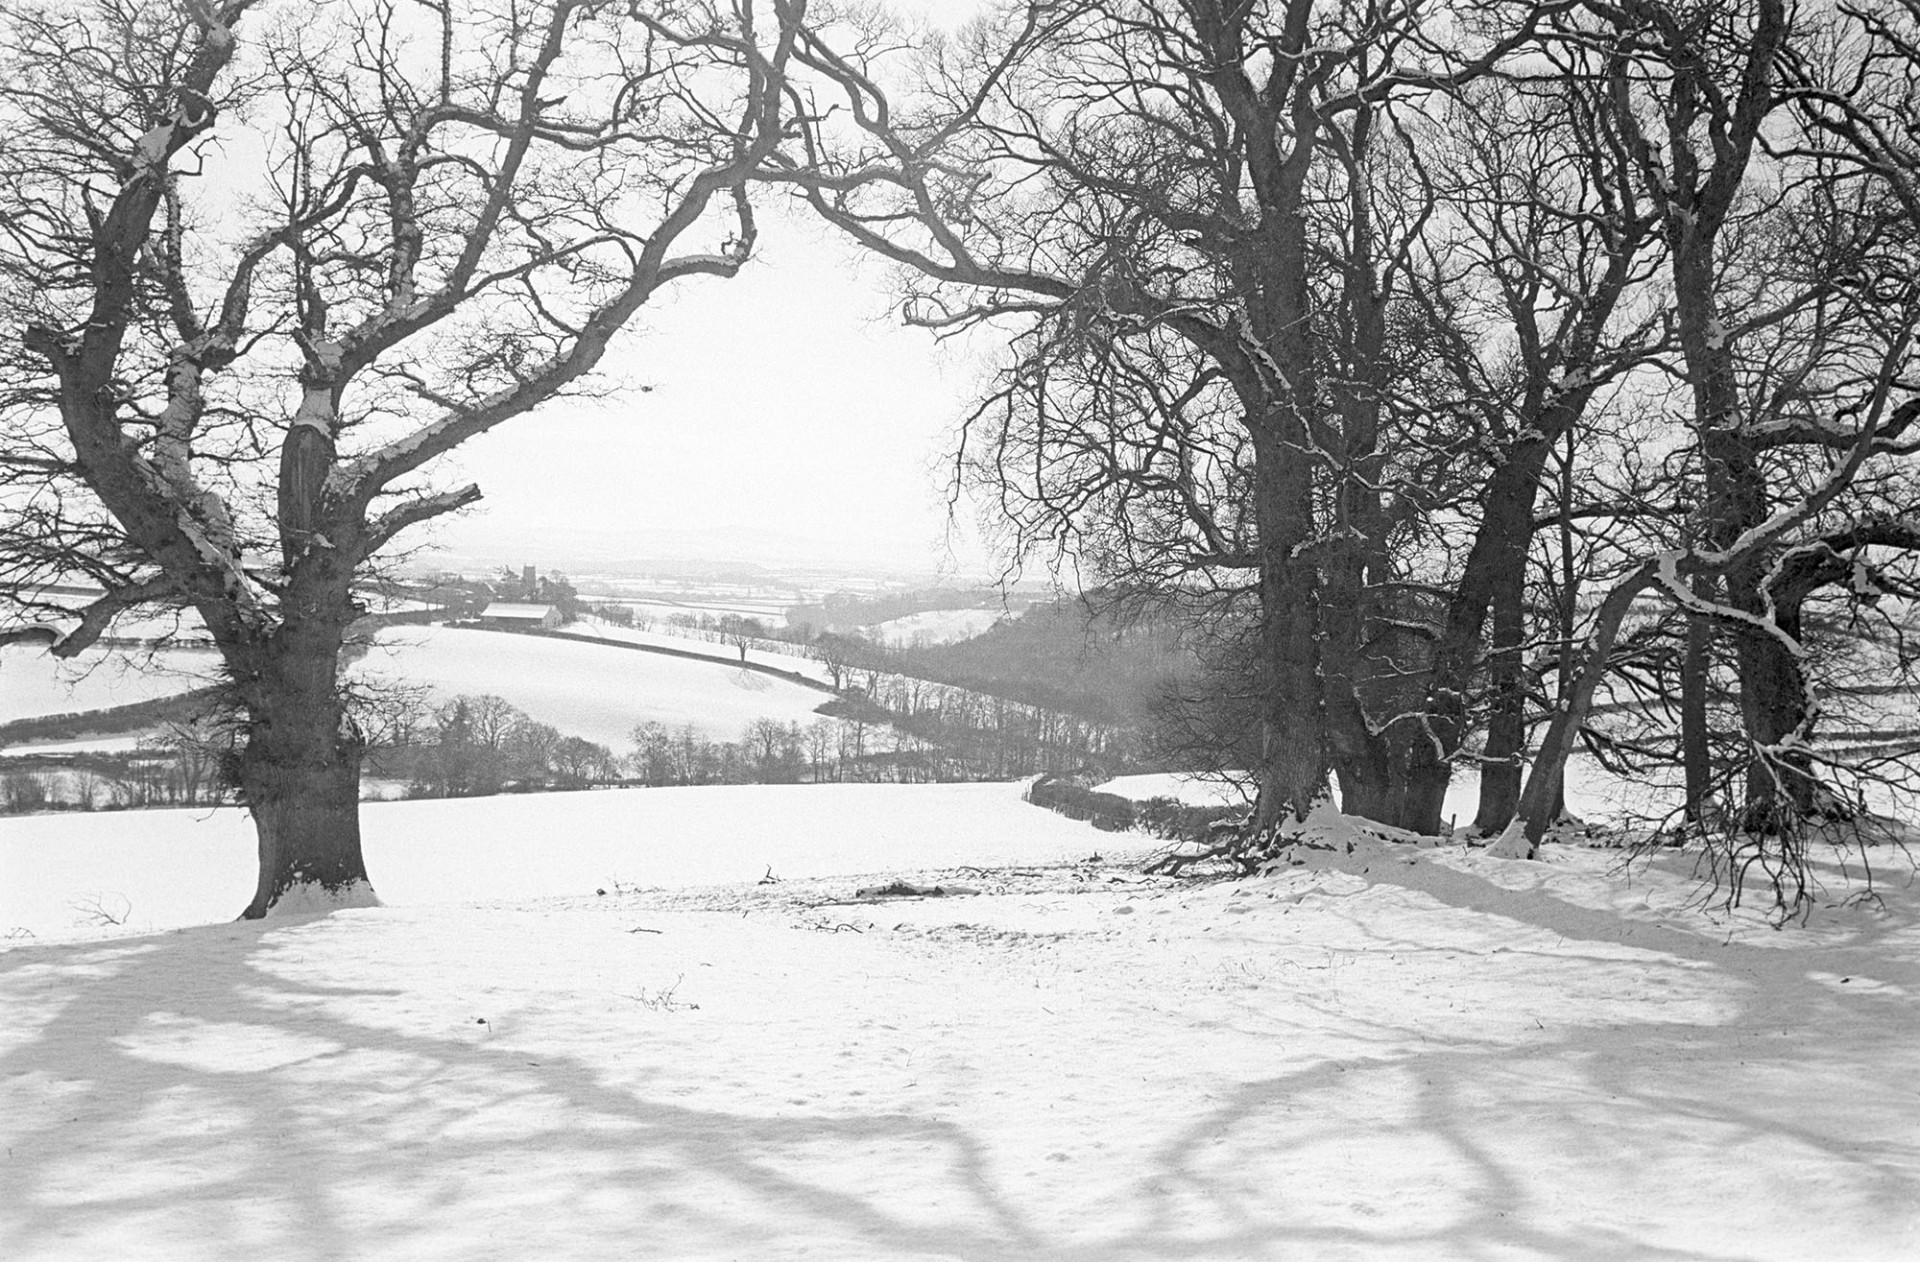 Snow scene with arch of trees, oak and elms now gone. Dutch Elm disease.
[A snowy scene at Berry, Iddesleigh, with an arch of oak and elm trees. Their shadows fall on the snow in the foreground.  The trees were later felled due to Dutch Elm Disease.]